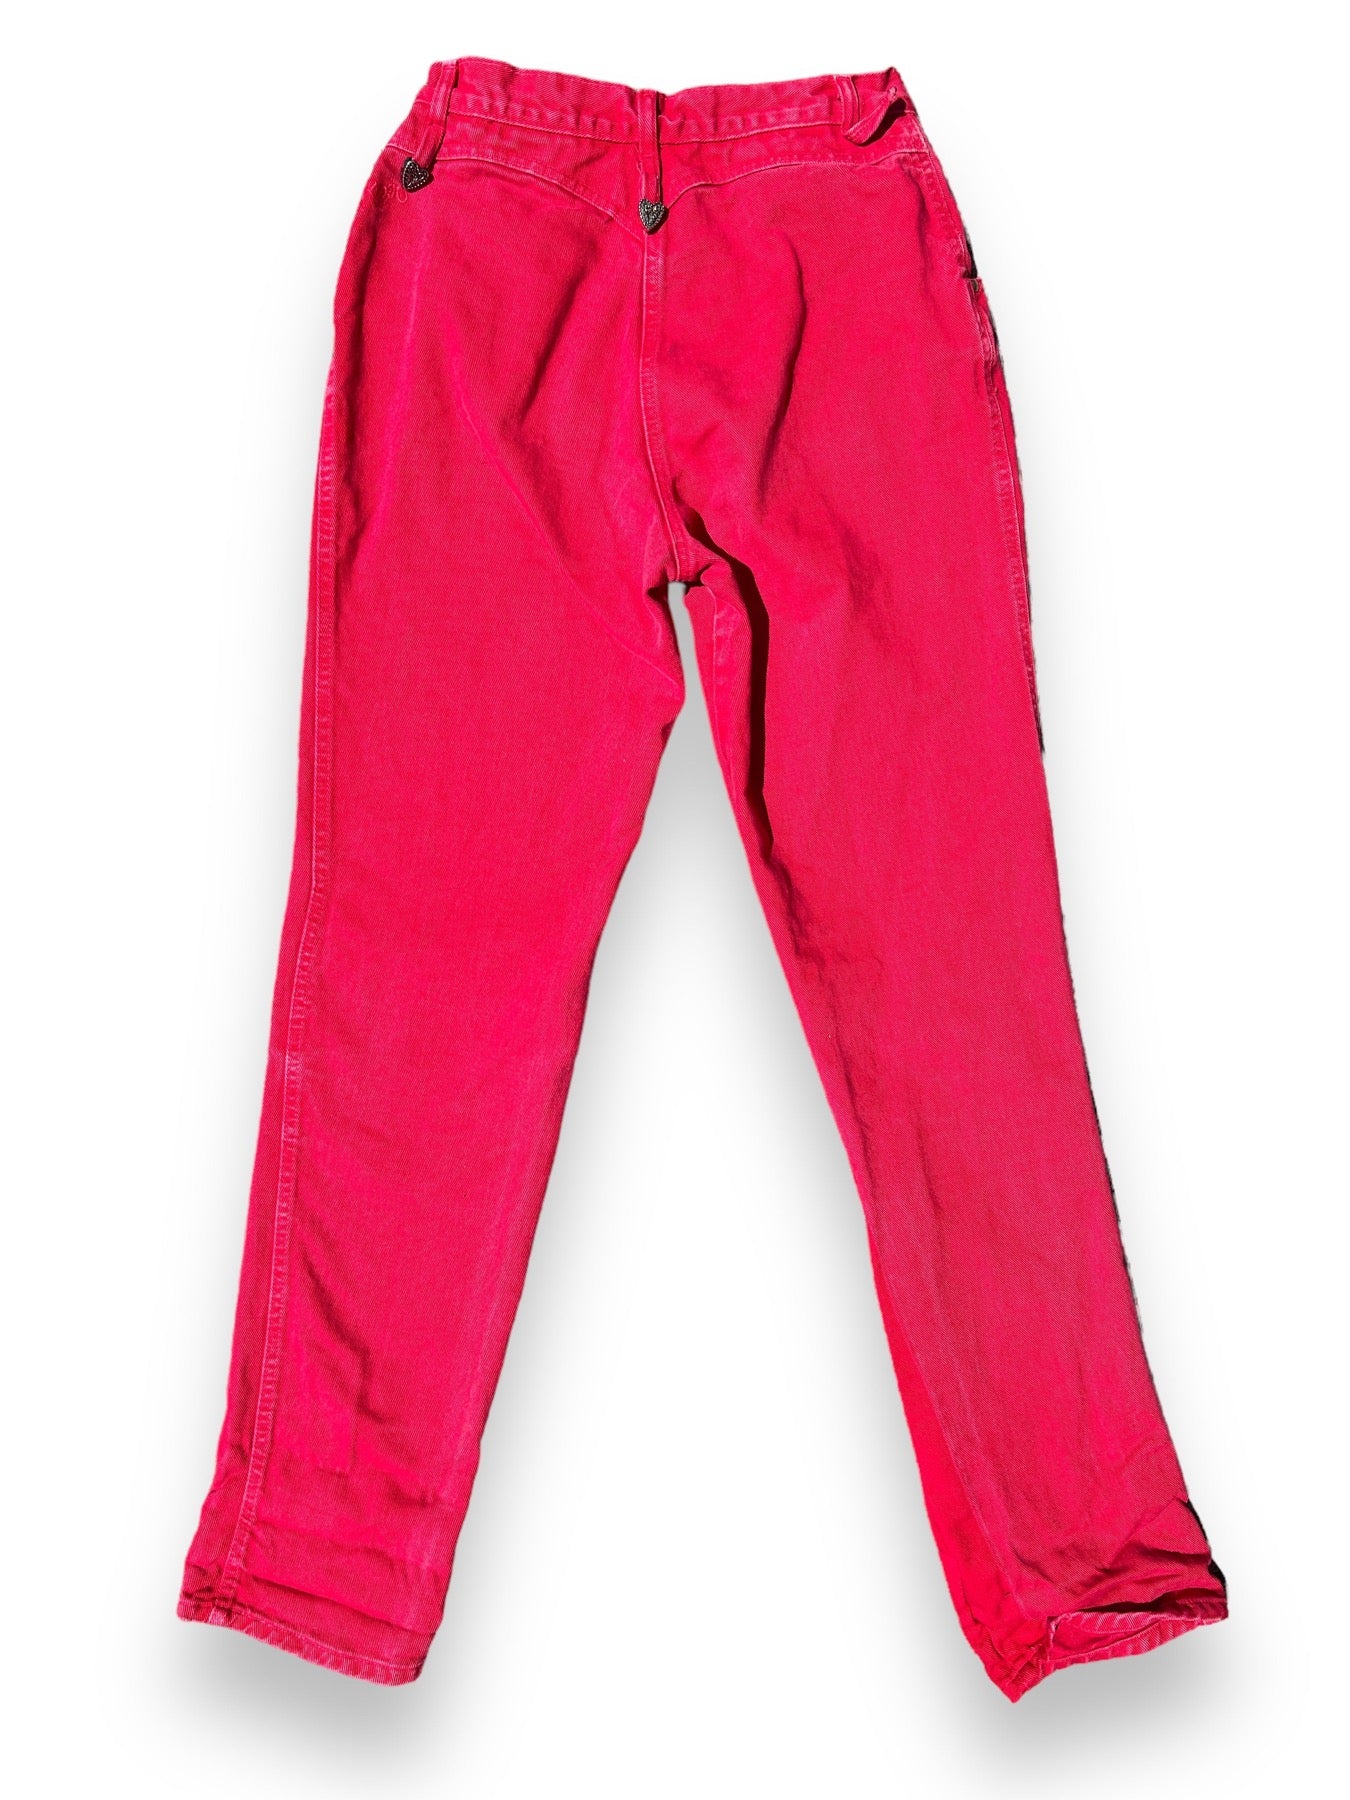 ROPER RED HEART CHARM JEANS